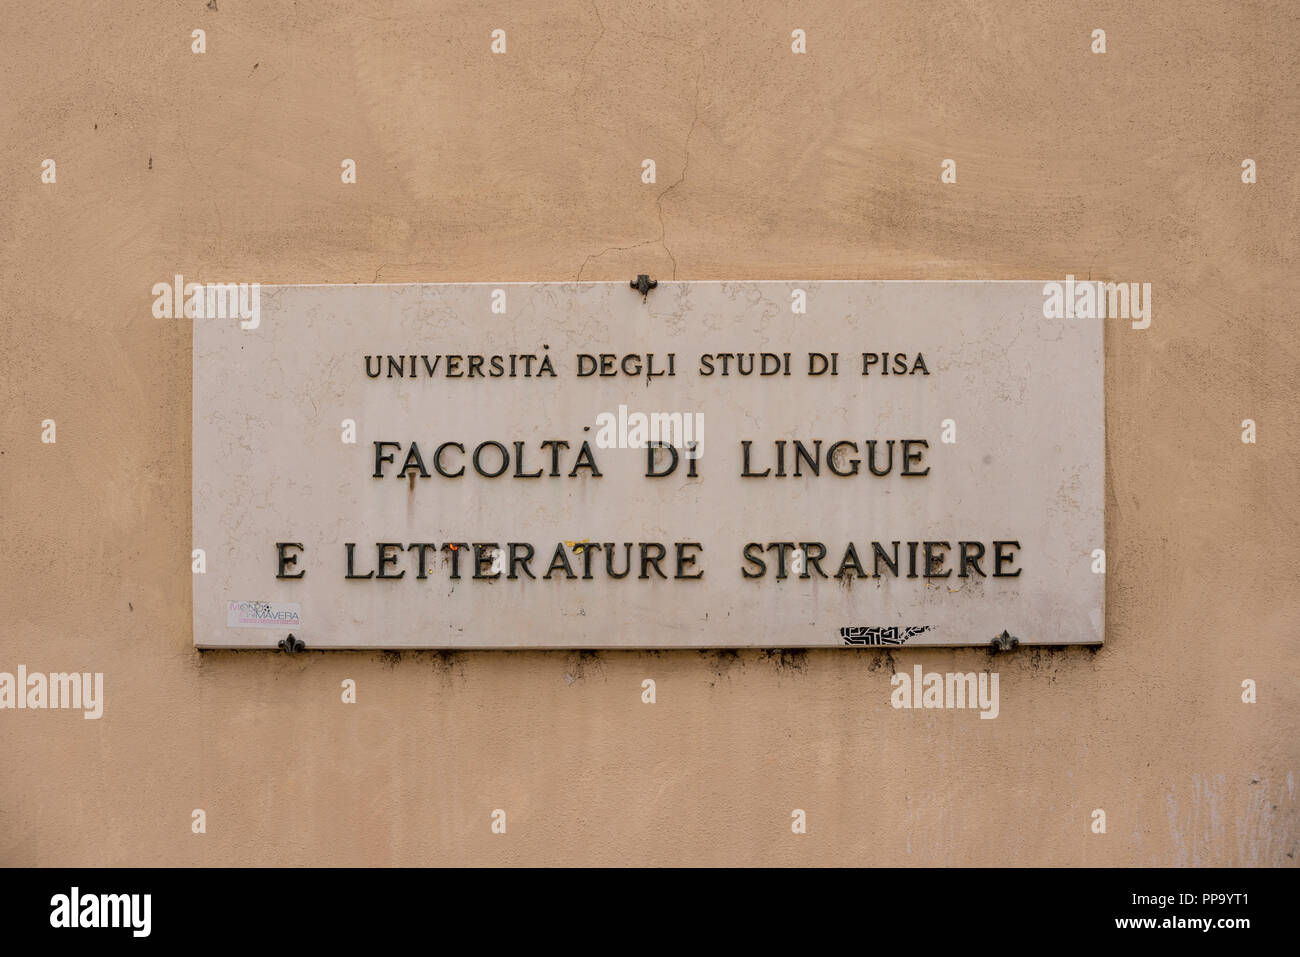 Foreign Languages and Literatures Faculty of University of Pisa, Pisa, Tuscany, Italy Stock Photo